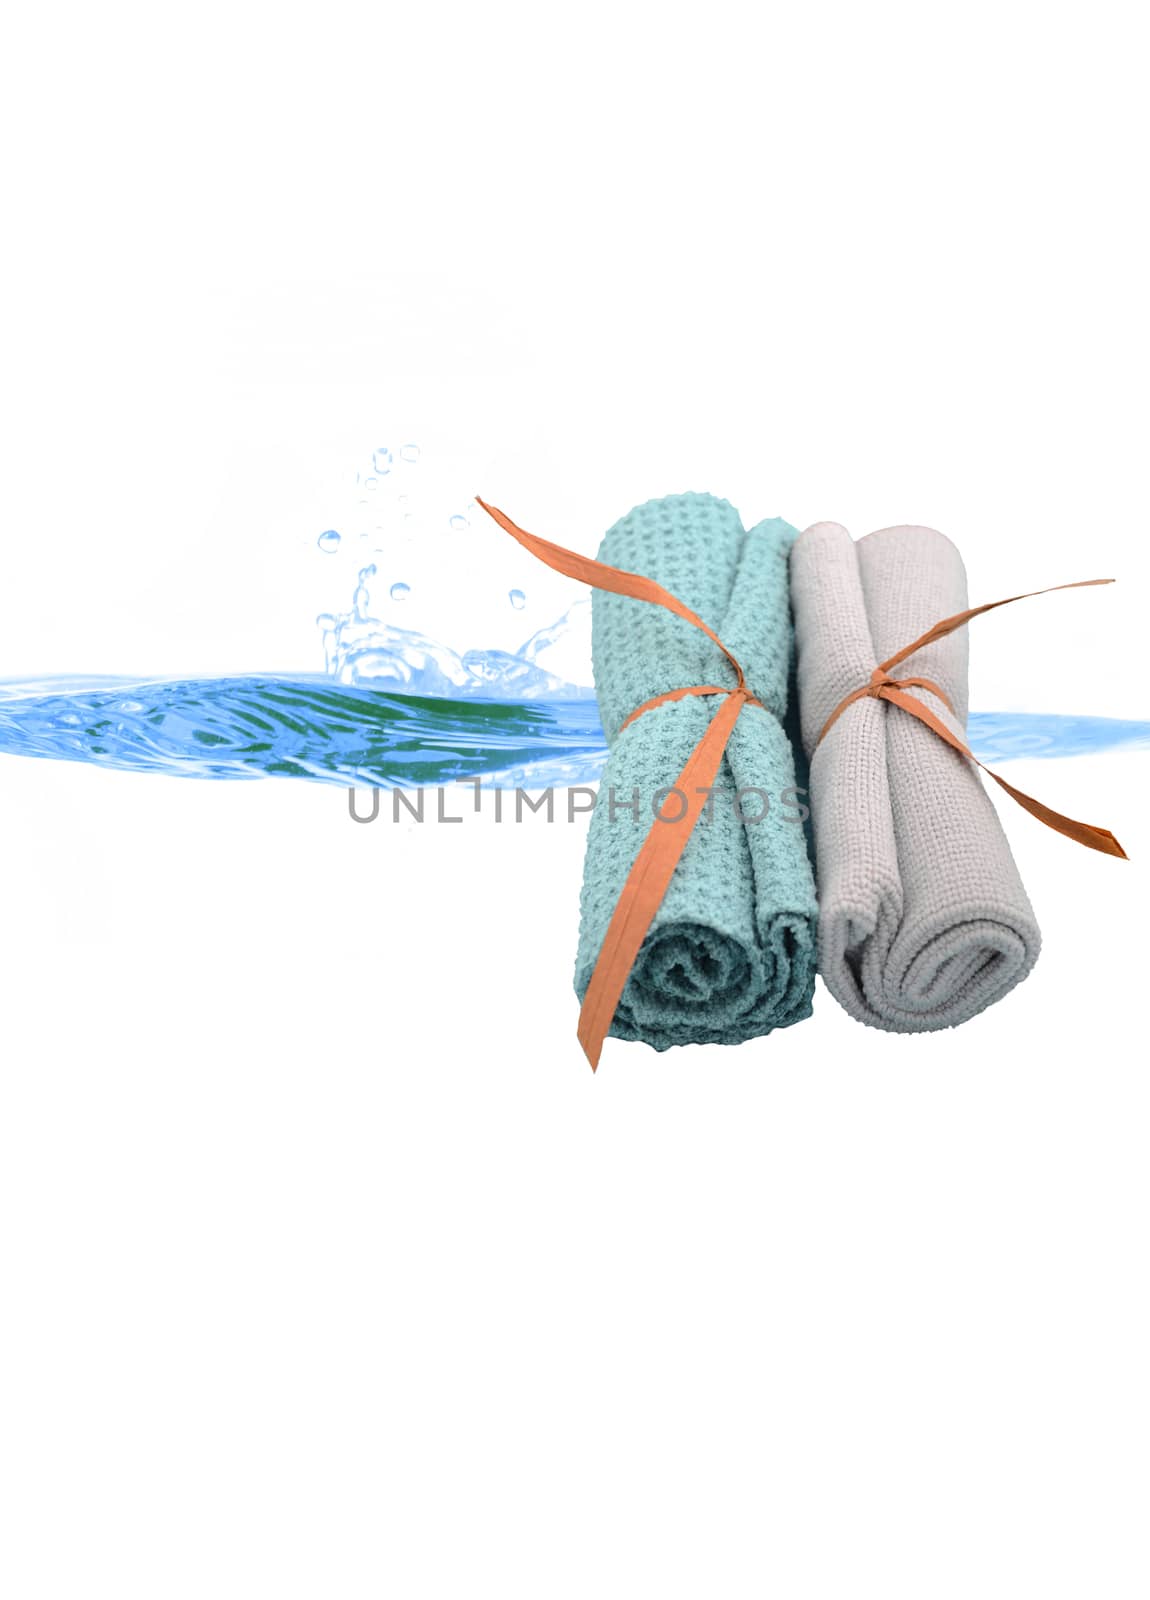 clean wash cloths for spa arrangement by ftlaudgirl